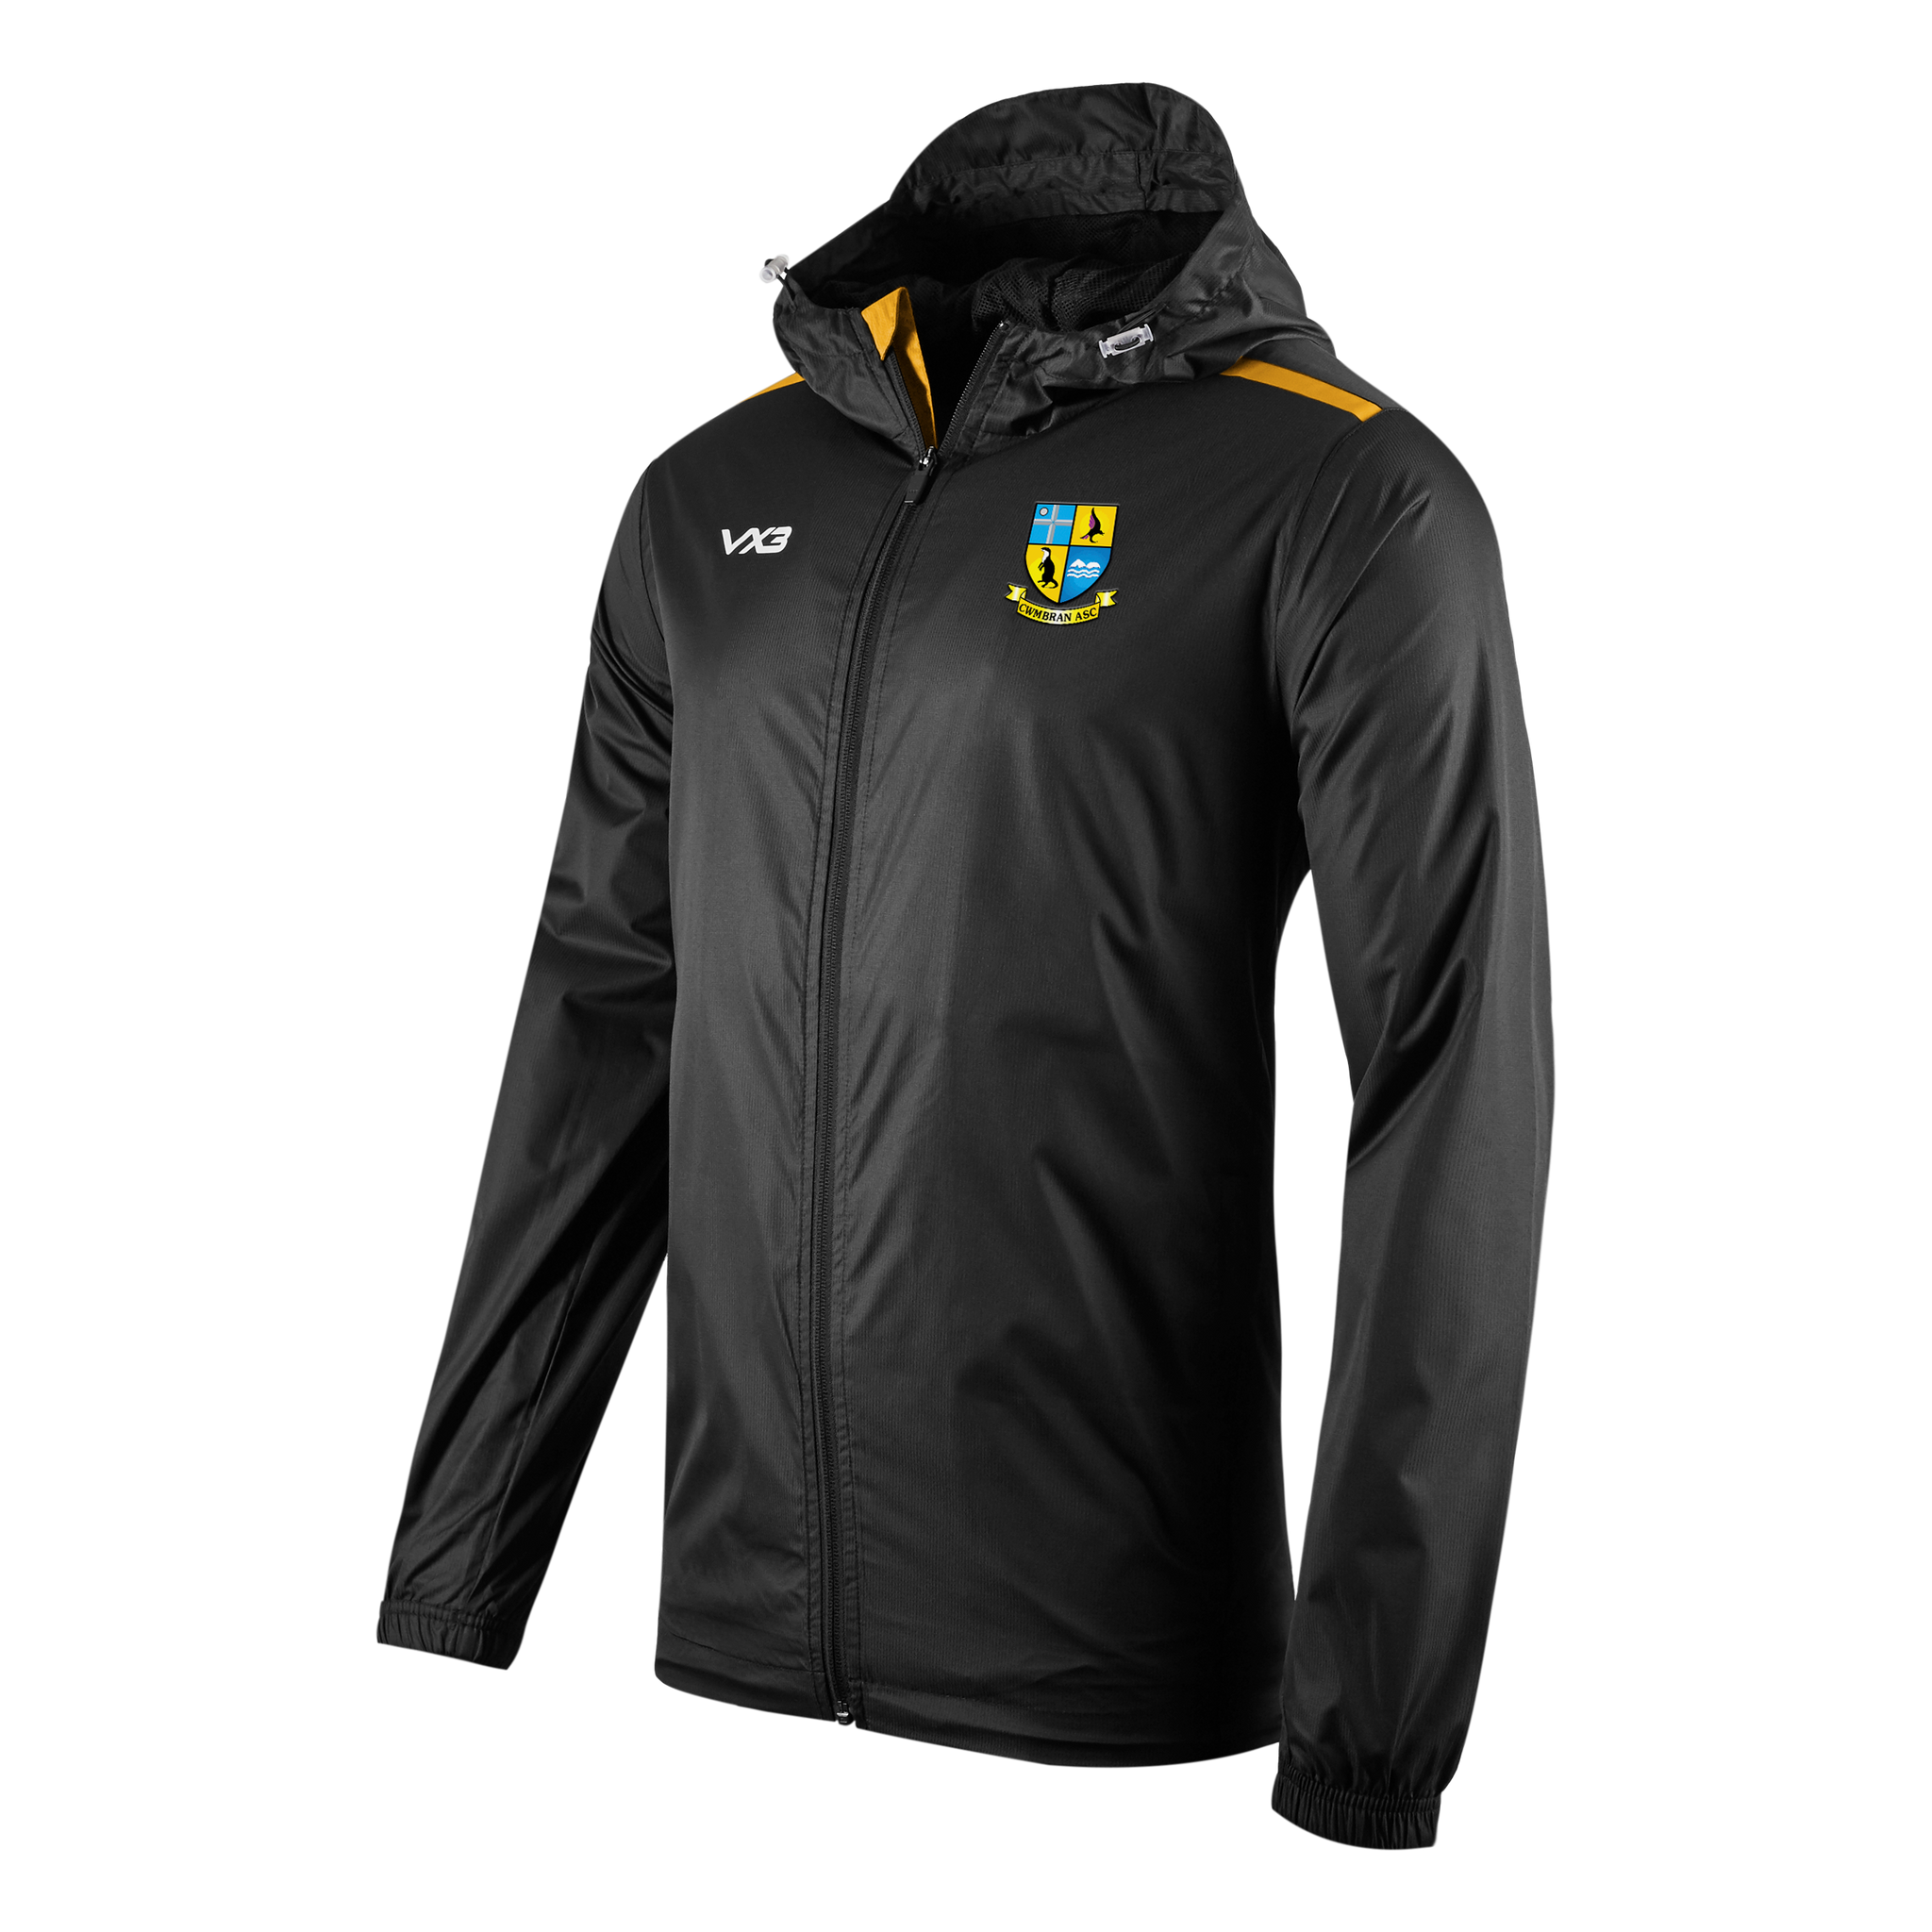 Cwmbran Otters Swimming Club Fortis Youth Full Zip Rain Jacket